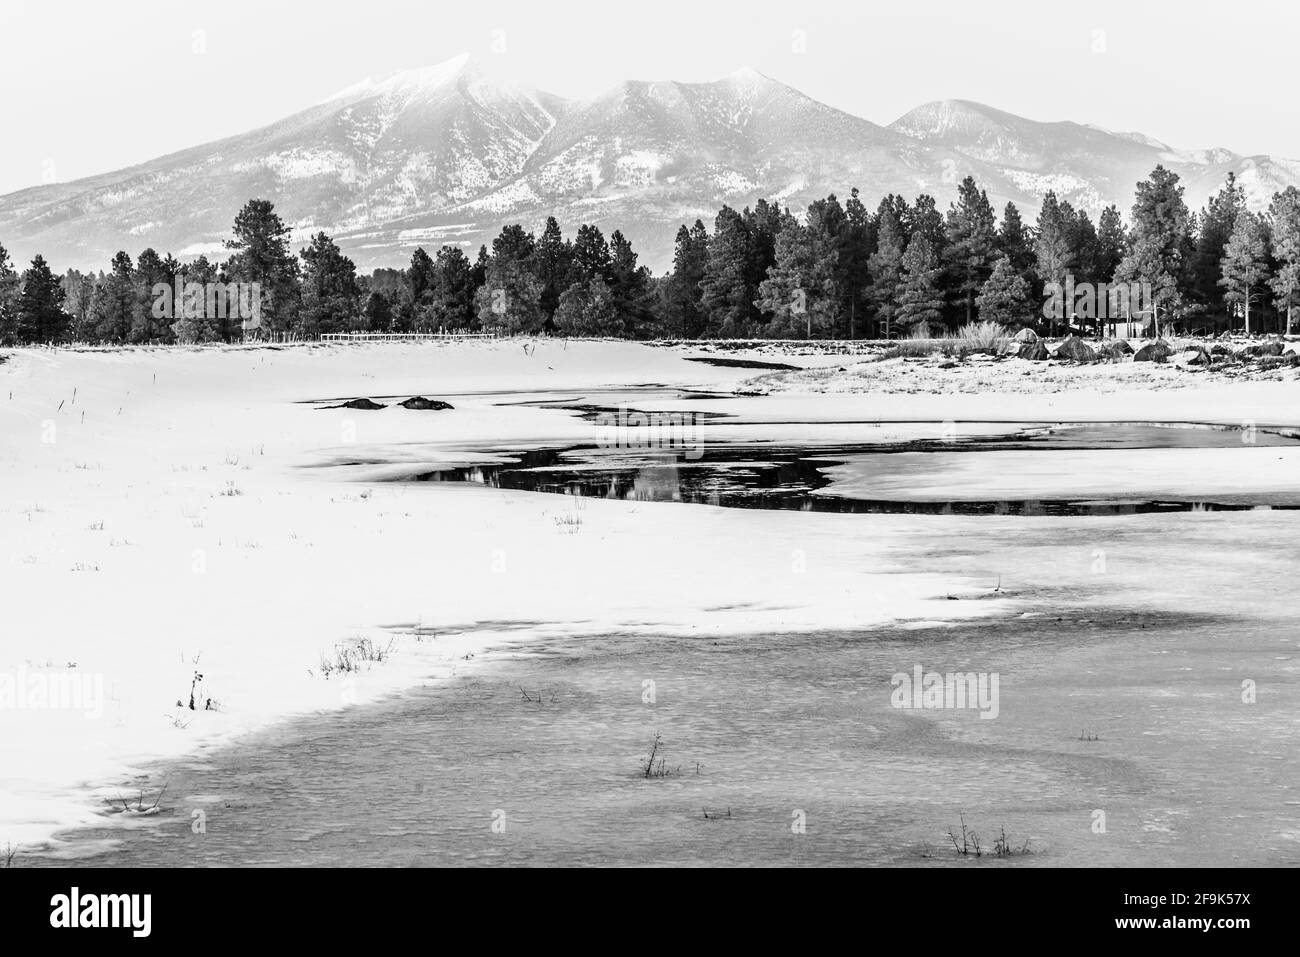 Black and white landscape photo of a frozen Kachina Wetlands Preserve in Flagstaff, Arizona, with the San Francisco Mountain in the background. Stock Photo